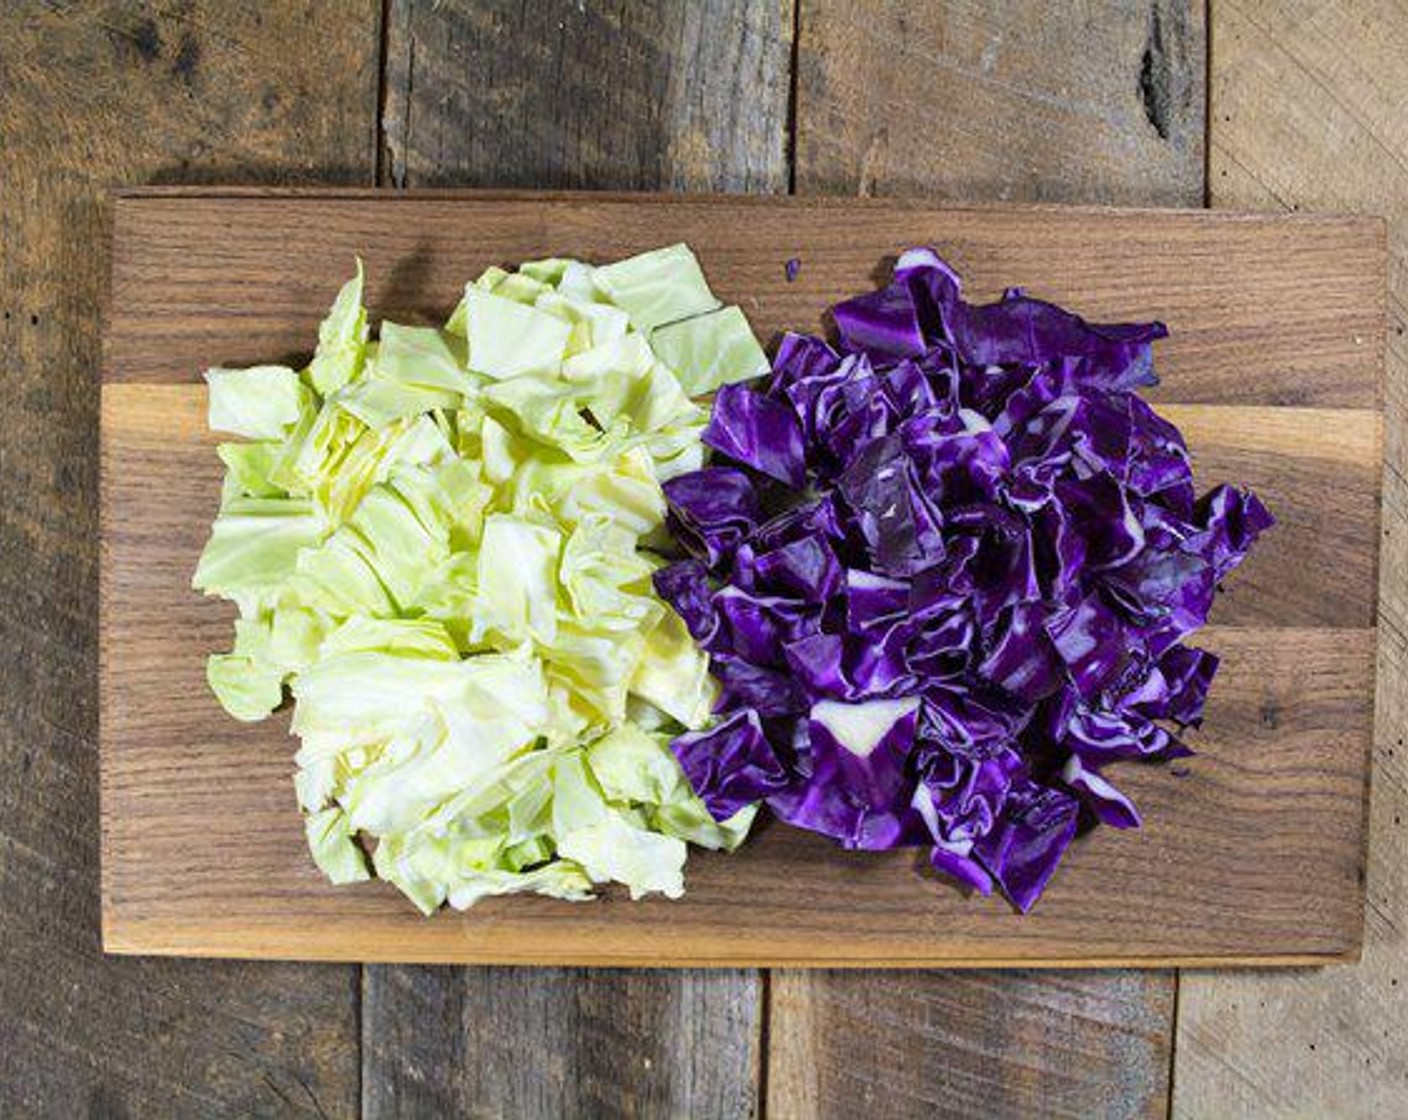 step 2 Add Red Cabbage (1/2 head) and Green Cabbage (1/2 head) to onion and peppers, stir to combine well, and cook 4-5 minutes.